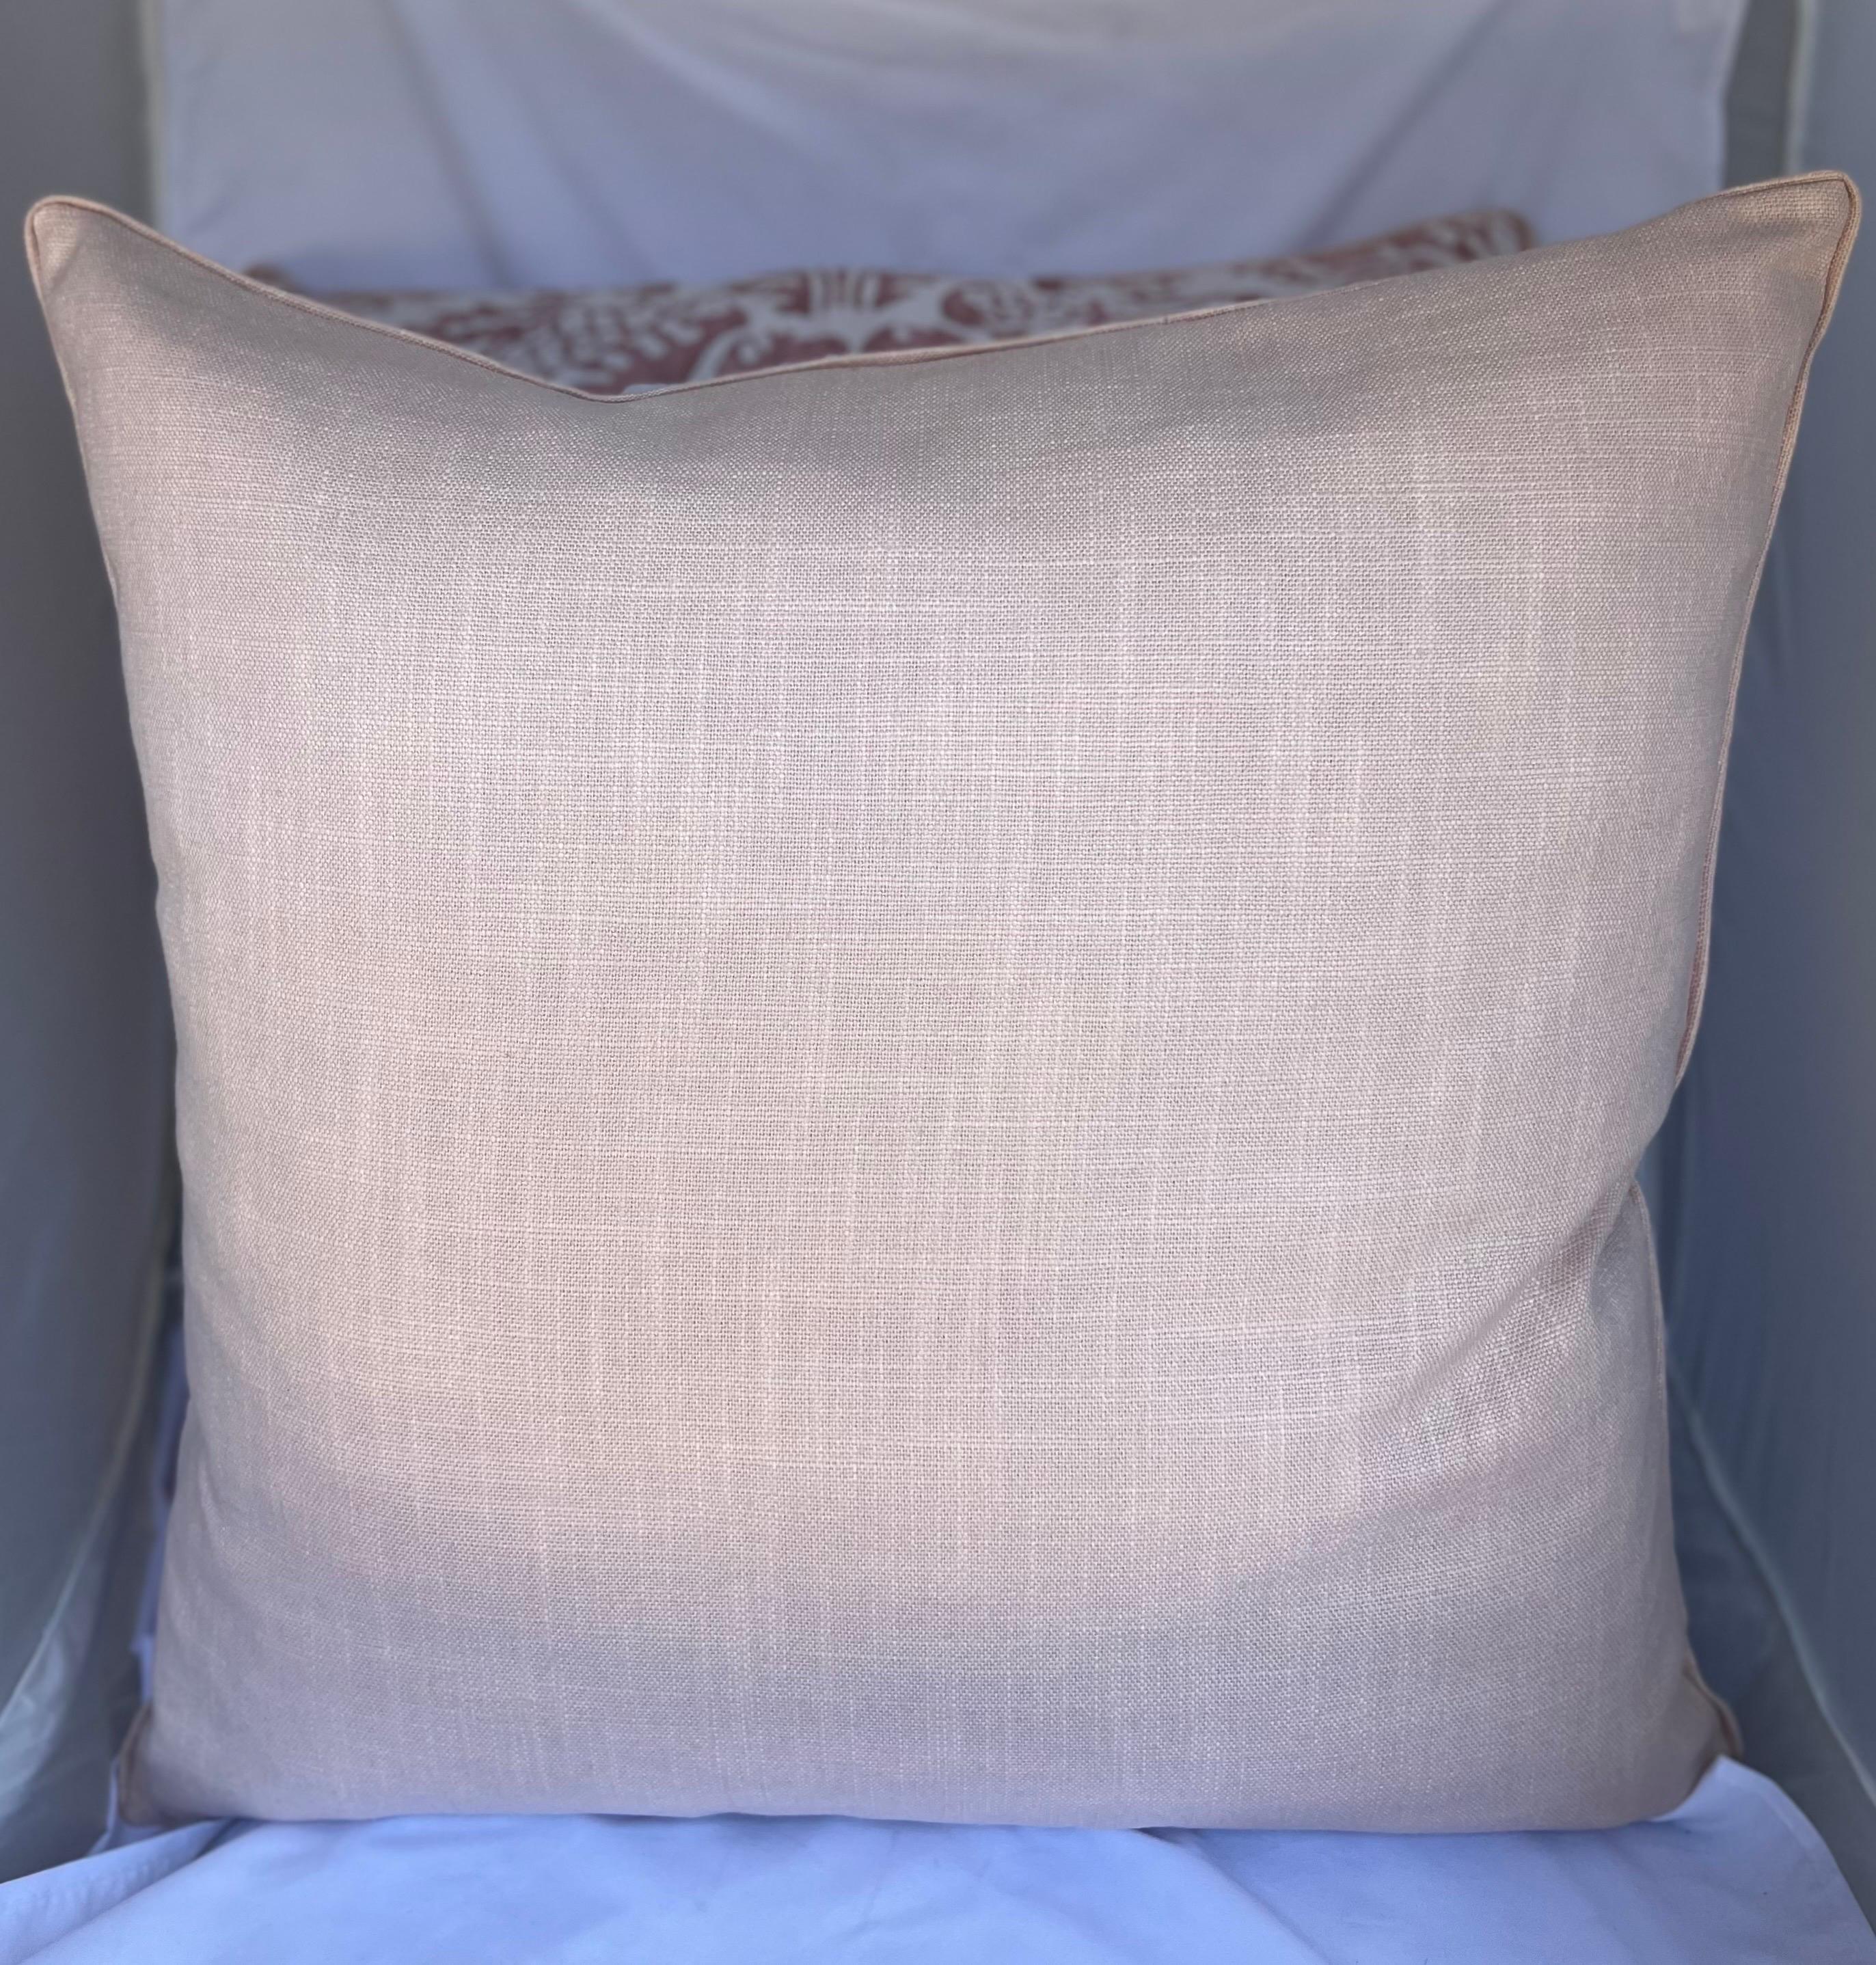 Pink & White Glicine Fortuny Patterned Textile Pillow In Excellent Condition For Sale In Los Angeles, CA